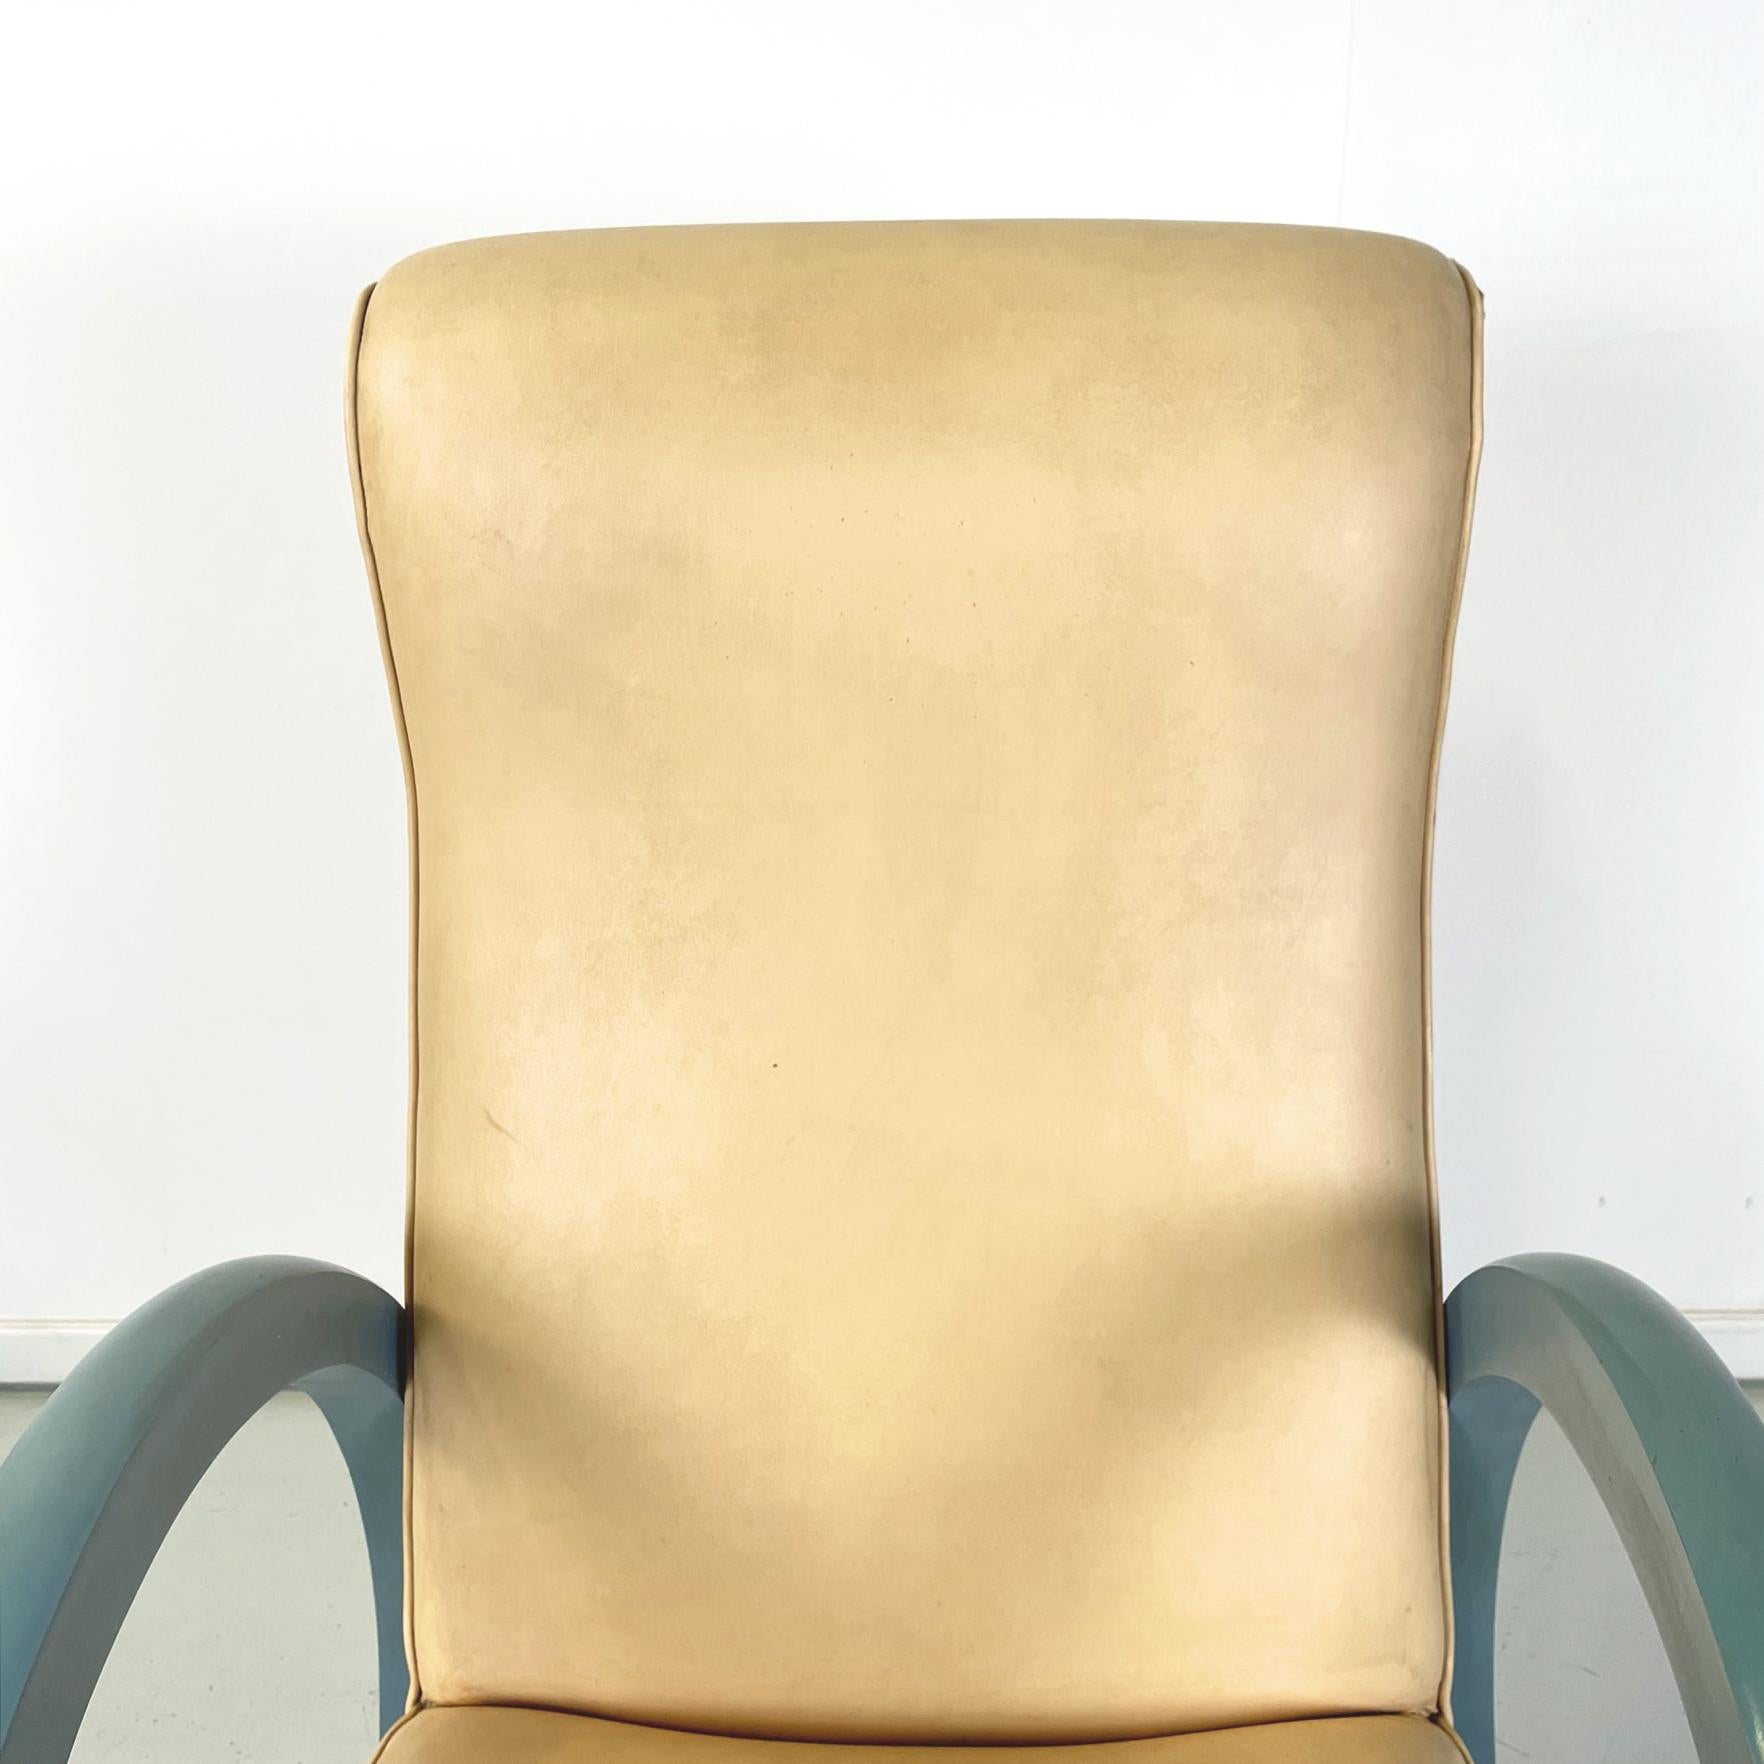 Italian Modern Armchair in Beige Leather and Light Blue Wood, 1980s For Sale 3